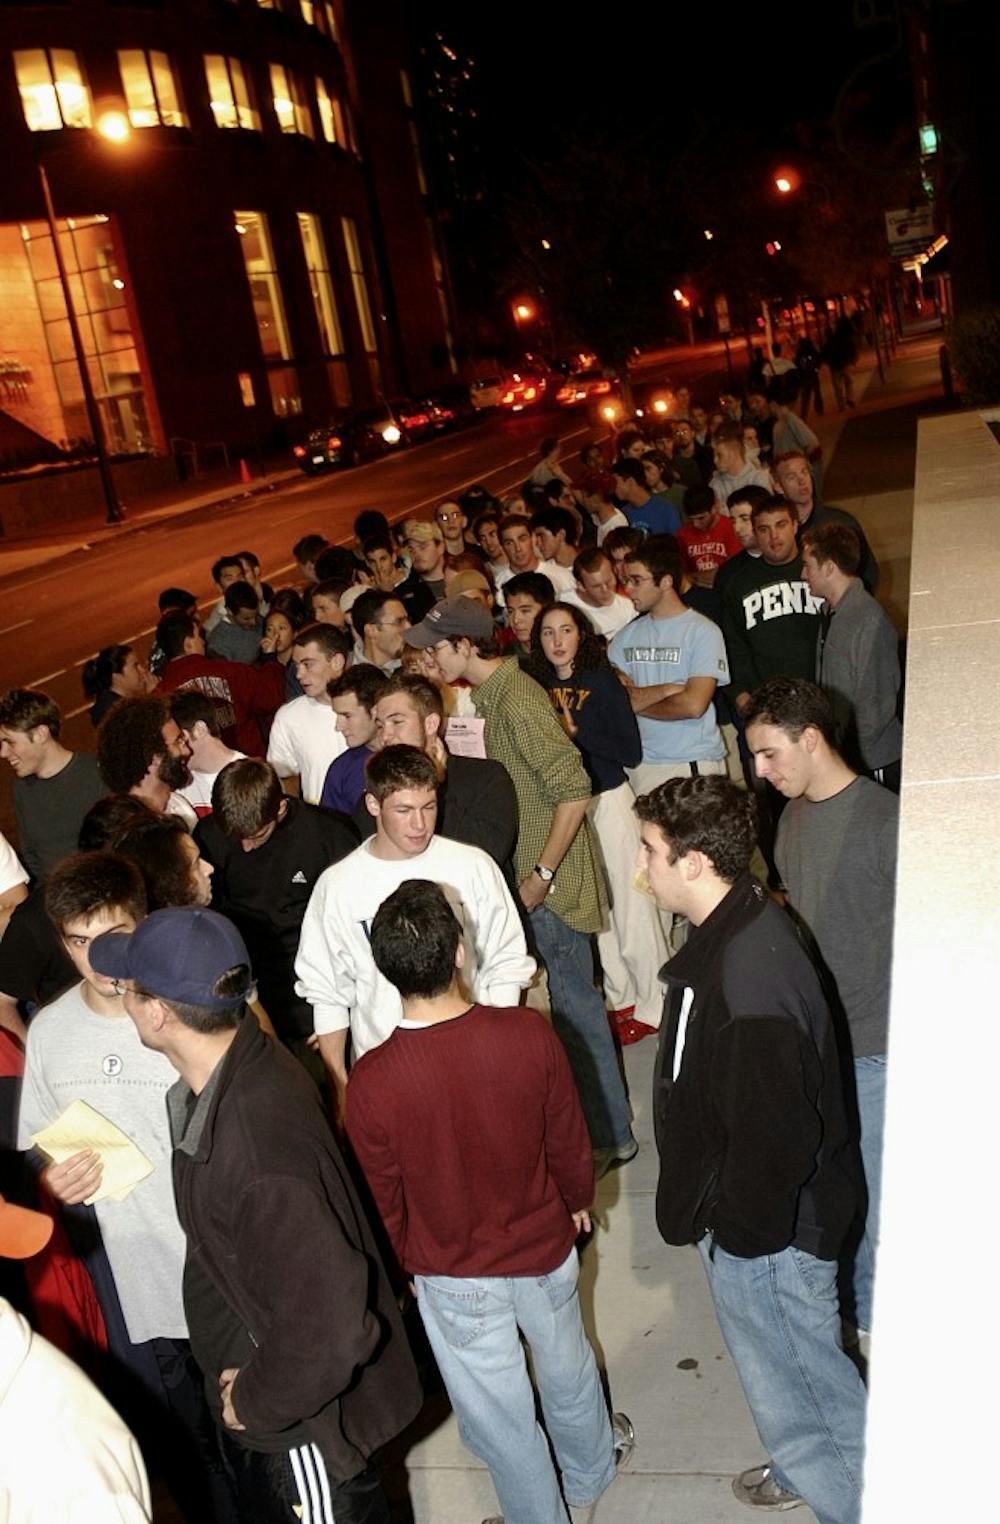 Hundreds of Penn fans anxiously wait for an opportunity to receive bracelets to buy season basketball tickets.  The location and time of the event wasn't announced until moments before the actual bracelets were given out.